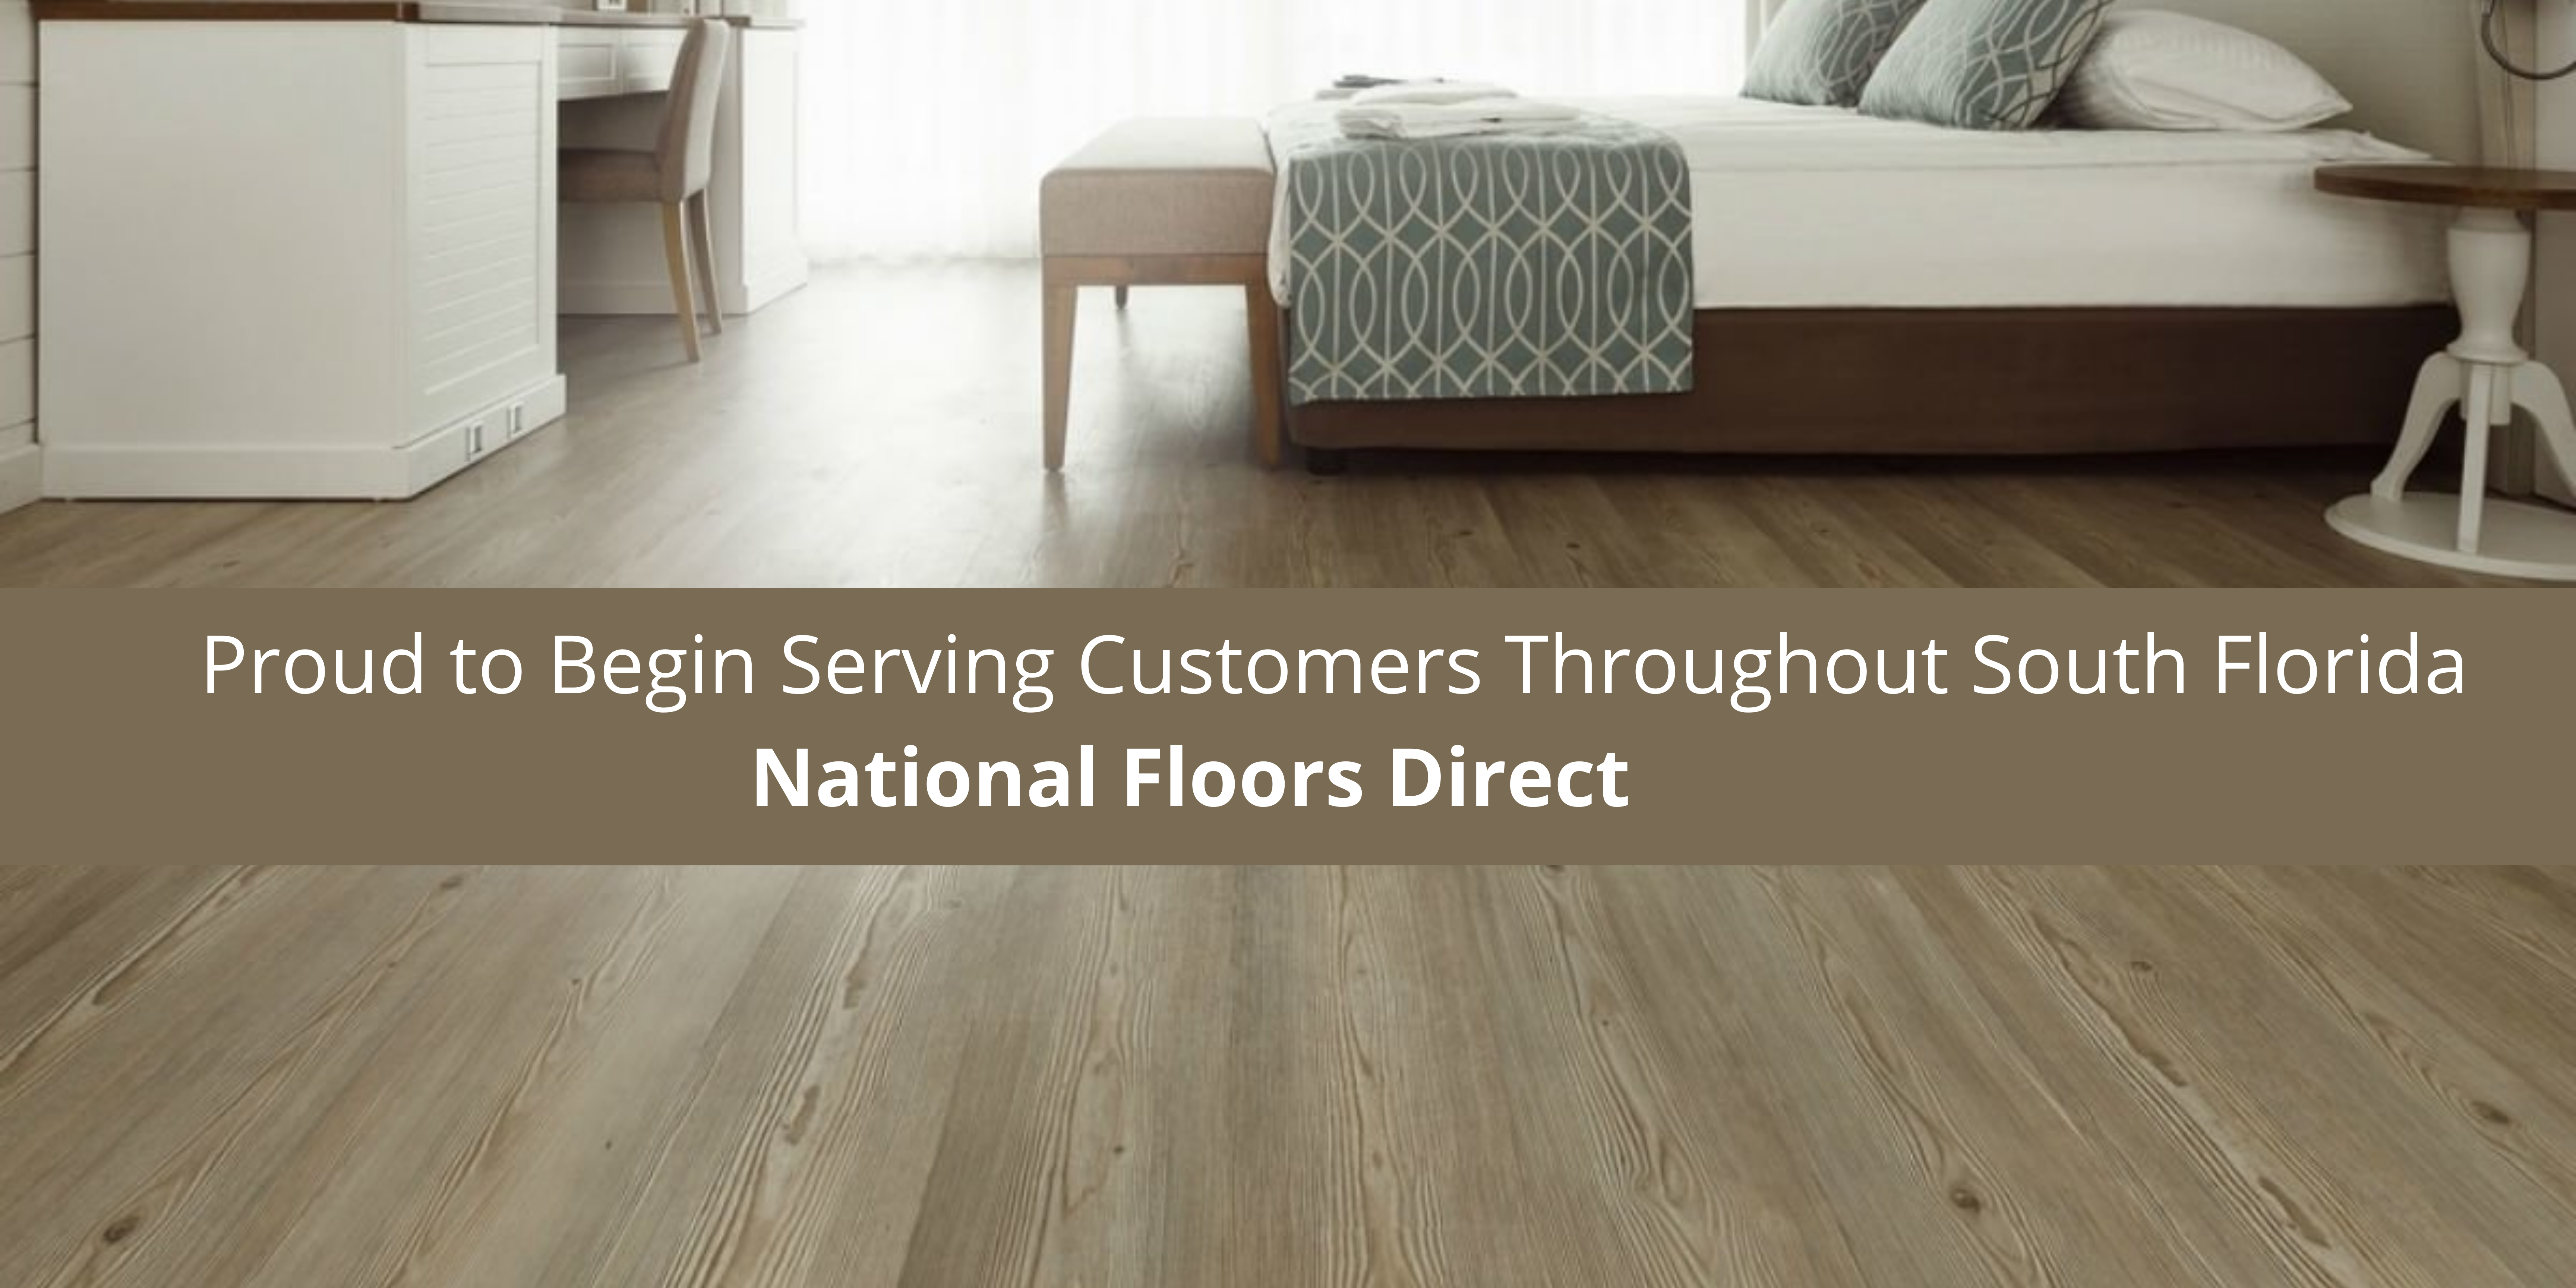 National Floors Direct is Proud to Begin Serving Customers South Florida